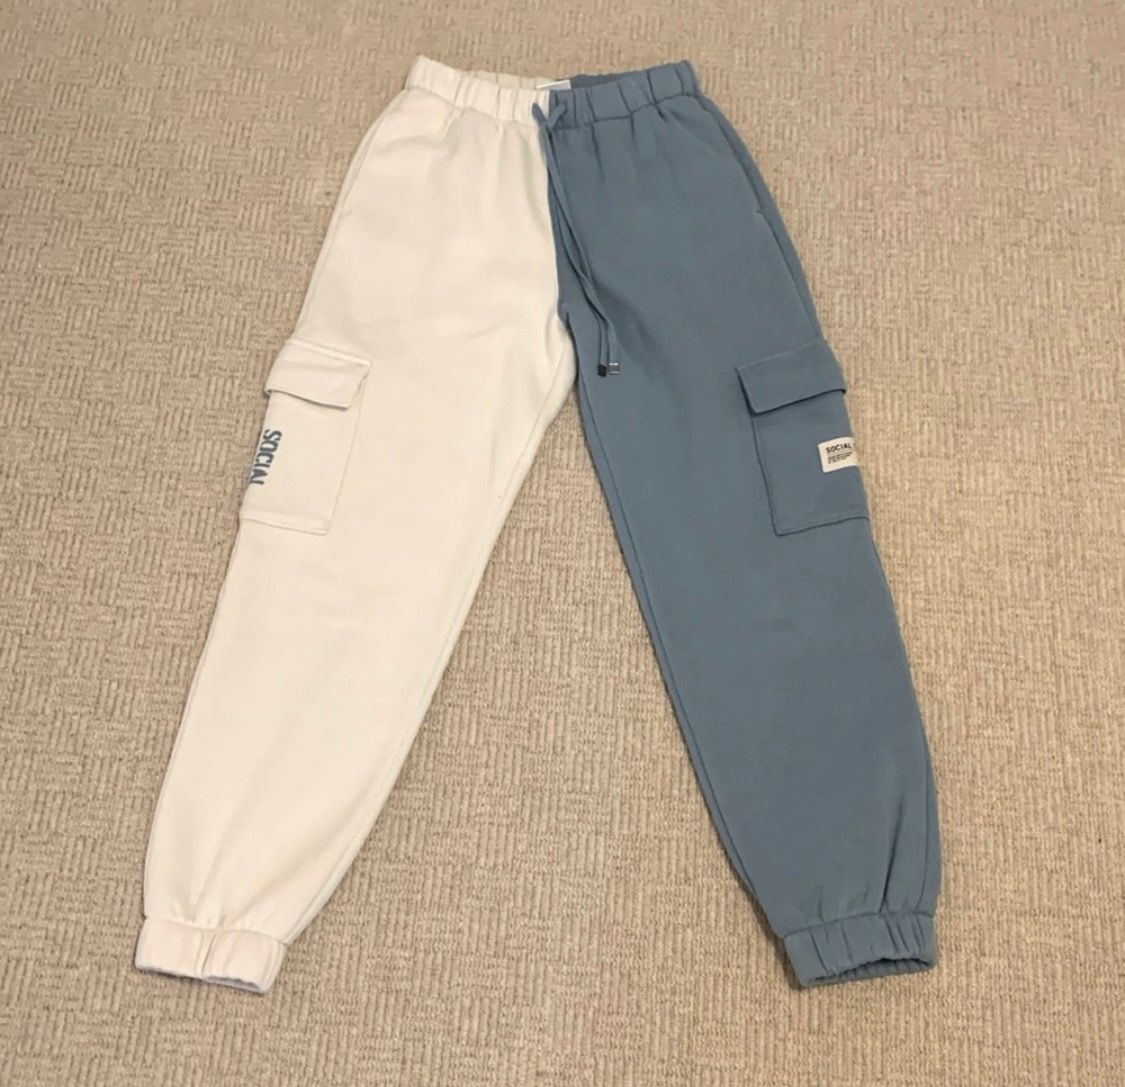 Hollister Social Tourist - blue and off white sweatpants with drawstring  Size XS - $15 (70% Off Retail) New With Tags - From Jacey